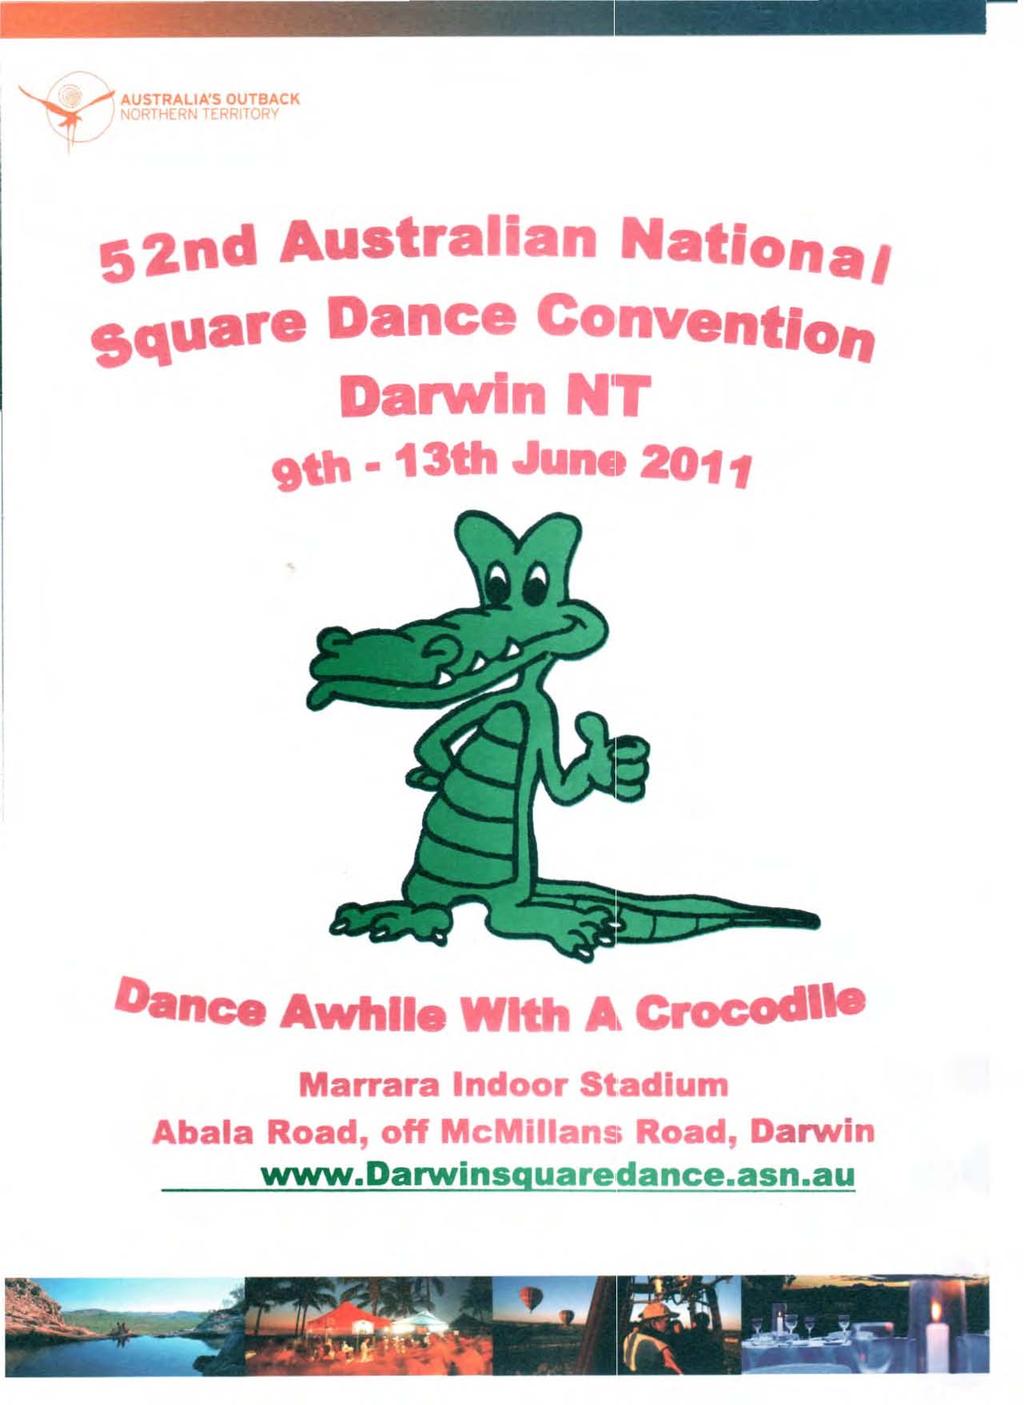 yo- Y AUSTRALIA'S OUTBACK N THERN RRITORY 52nd Australian Nationa, Square Dance Convention Darwin NIT 9th 13th